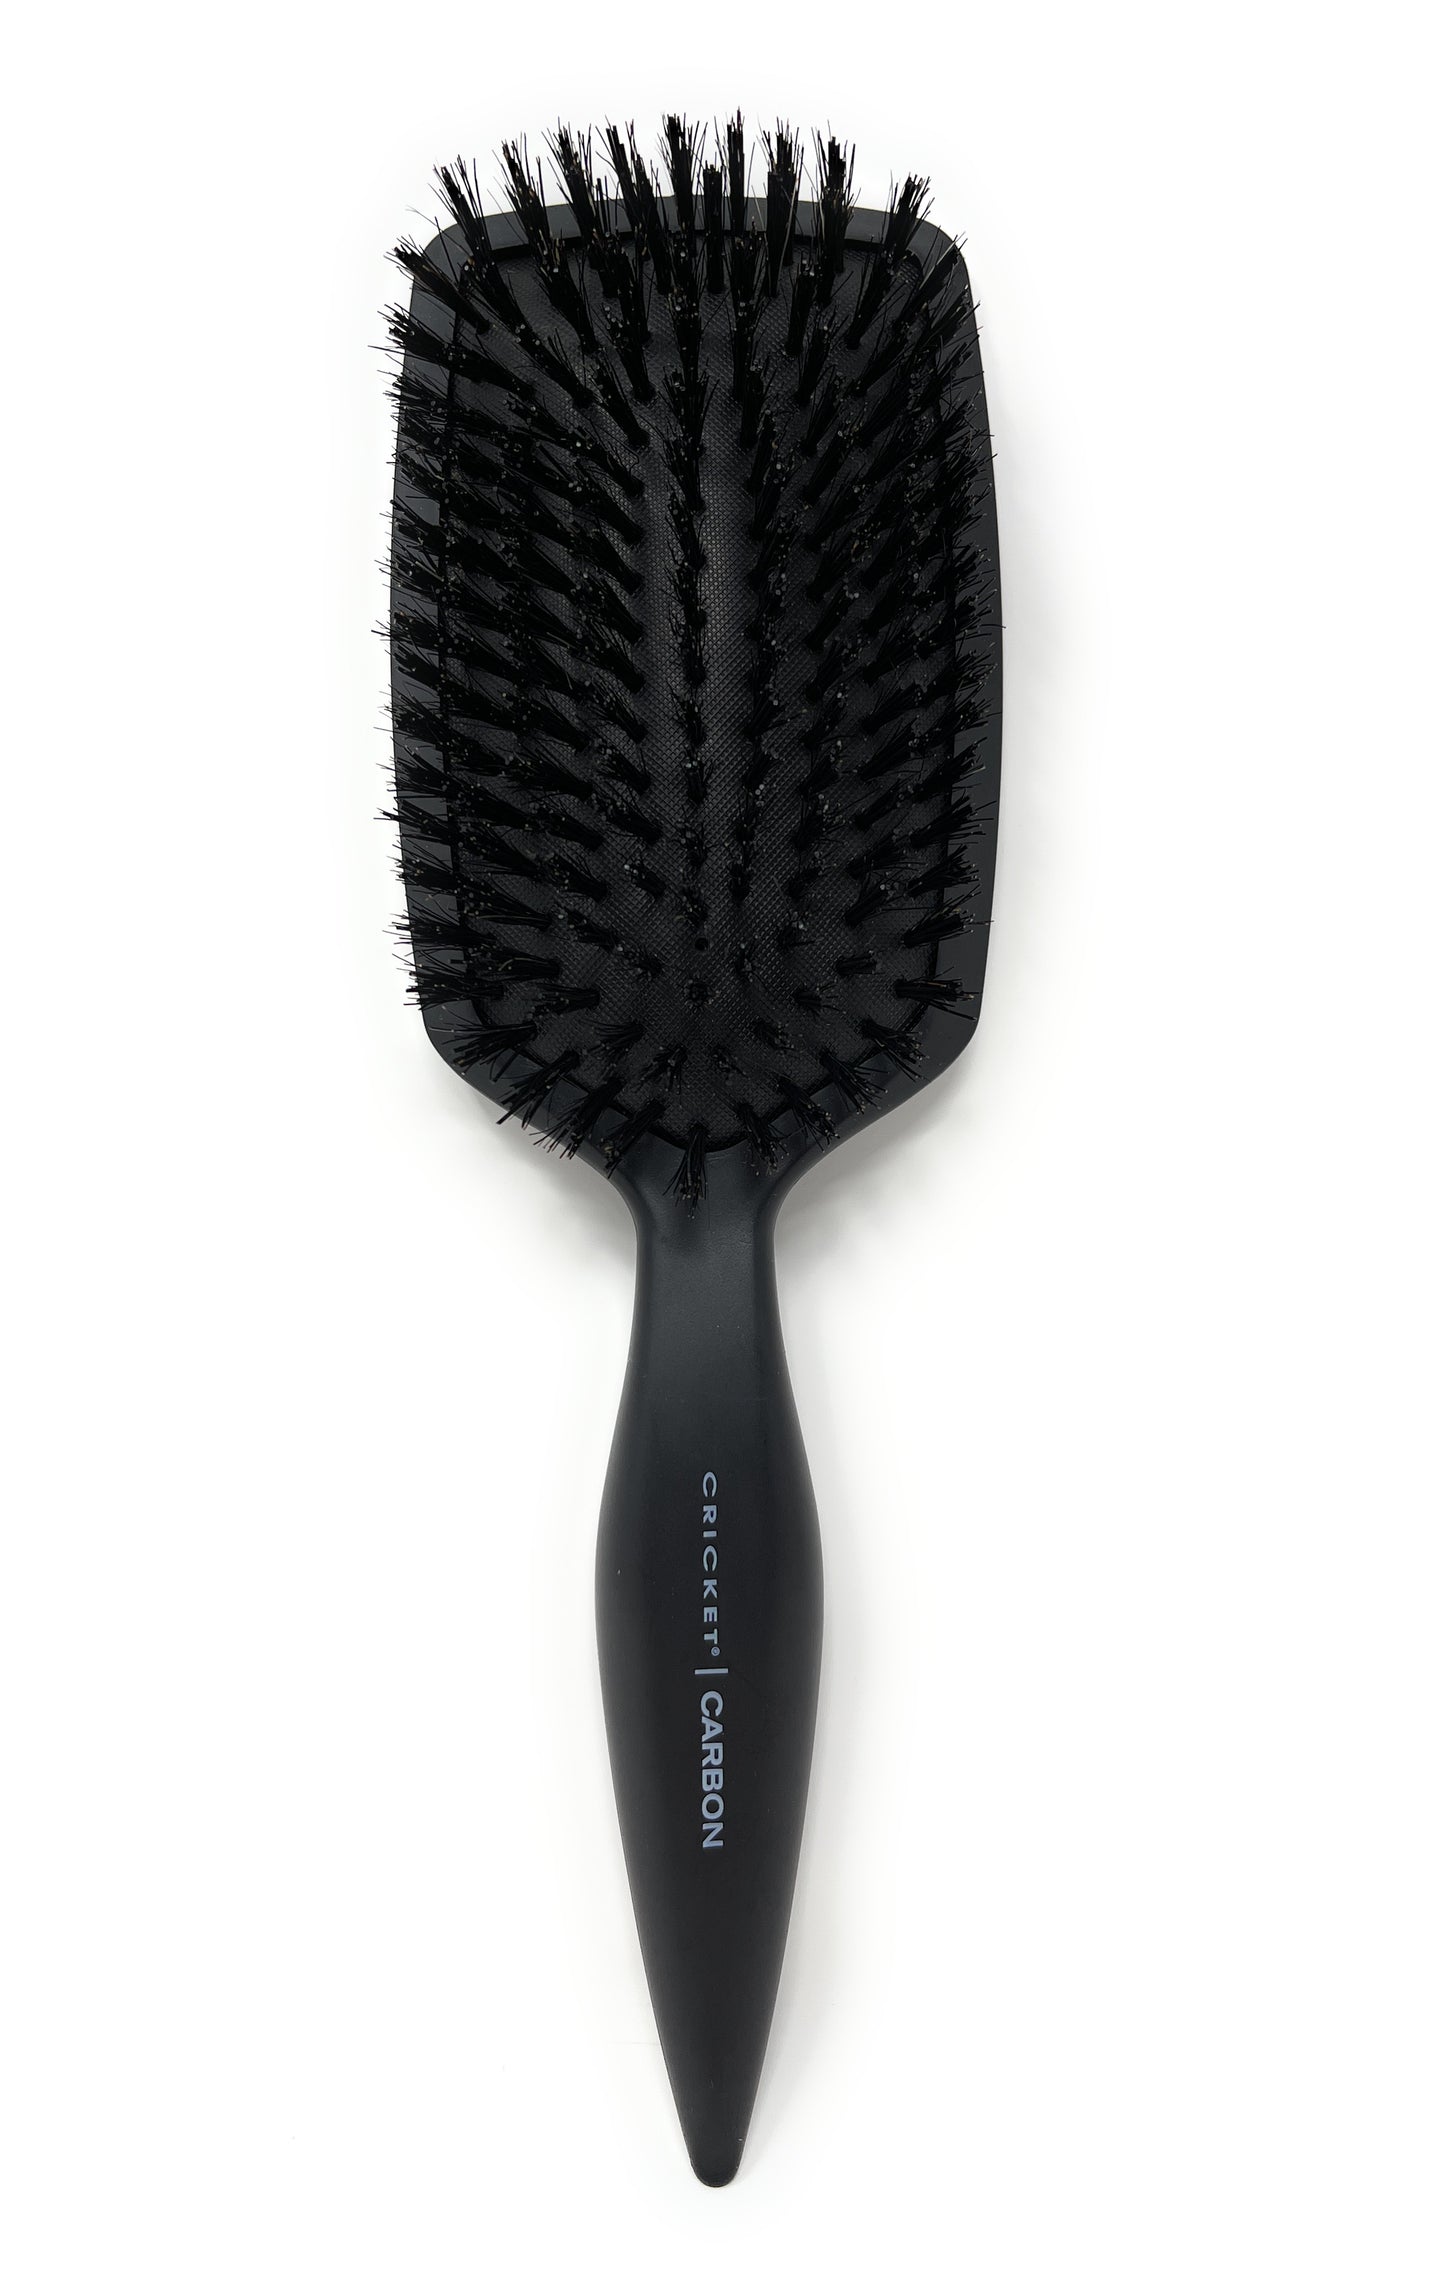 Cricket Carbon Boar Paddle Hair Brush for Blow Drying and Styling, Large Wide Anti-Static Hairbrush for Long Short Thick Thin Curly Straight Hair